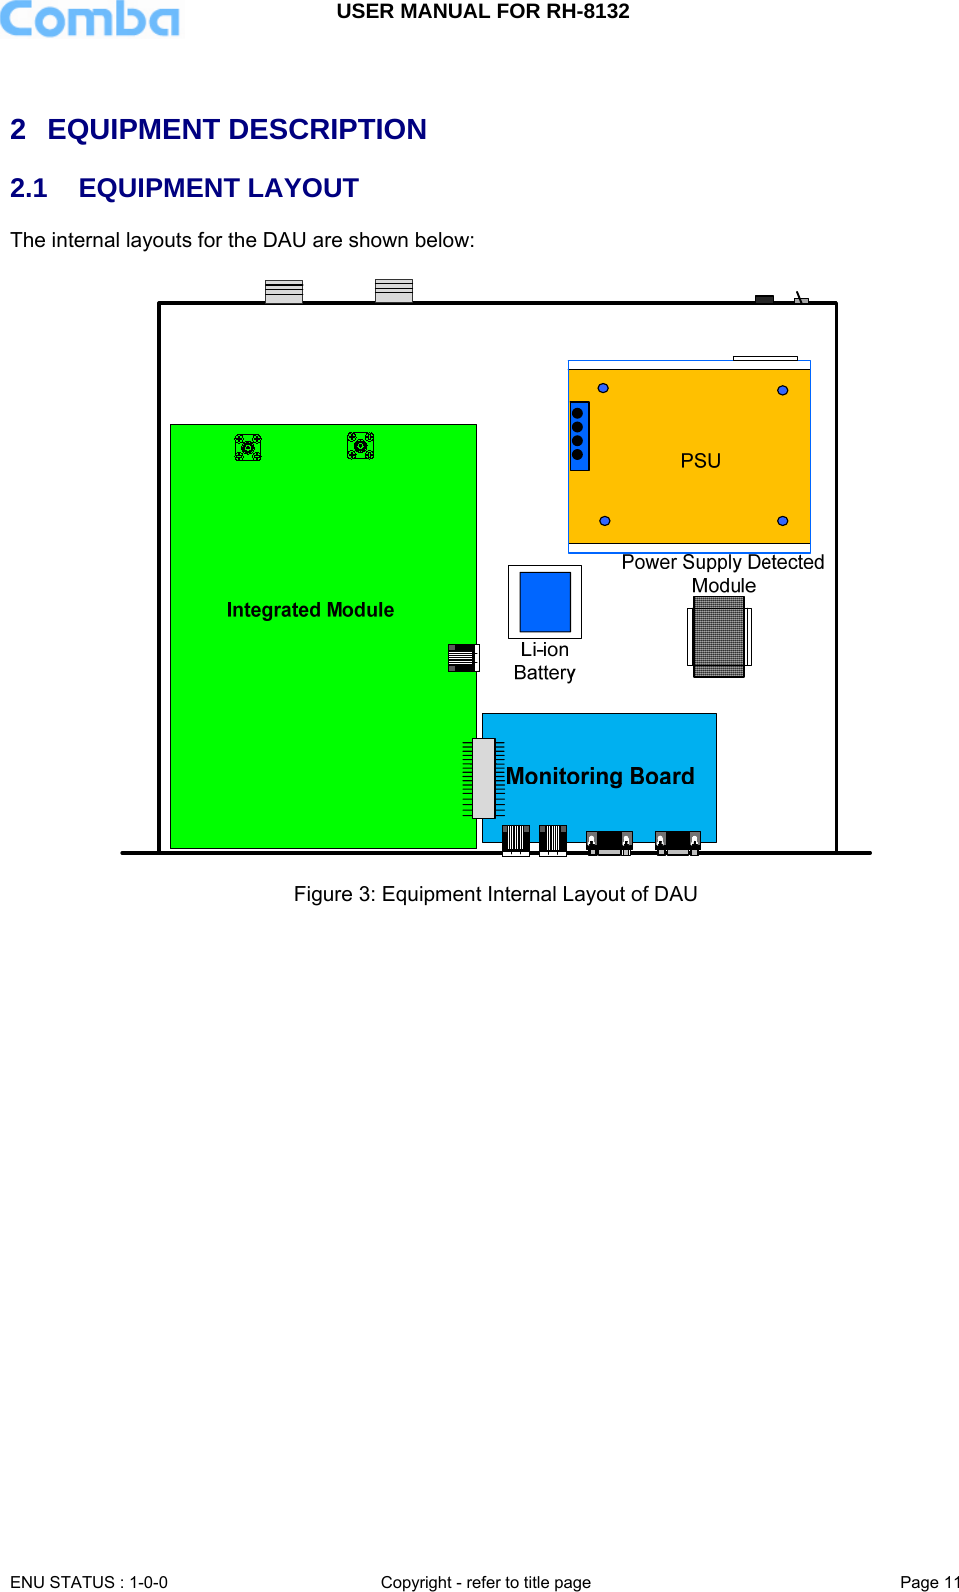 USER MANUAL FOR RH-8132     ENU STATUS : 1-0-0  Copyright - refer to title page  Page 11    2 EQUIPMENT DESCRIPTION 2.1 EQUIPMENT LAYOUT The internal layouts for the DAU are shown below:    Figure 3: Equipment Internal Layout of DAU   